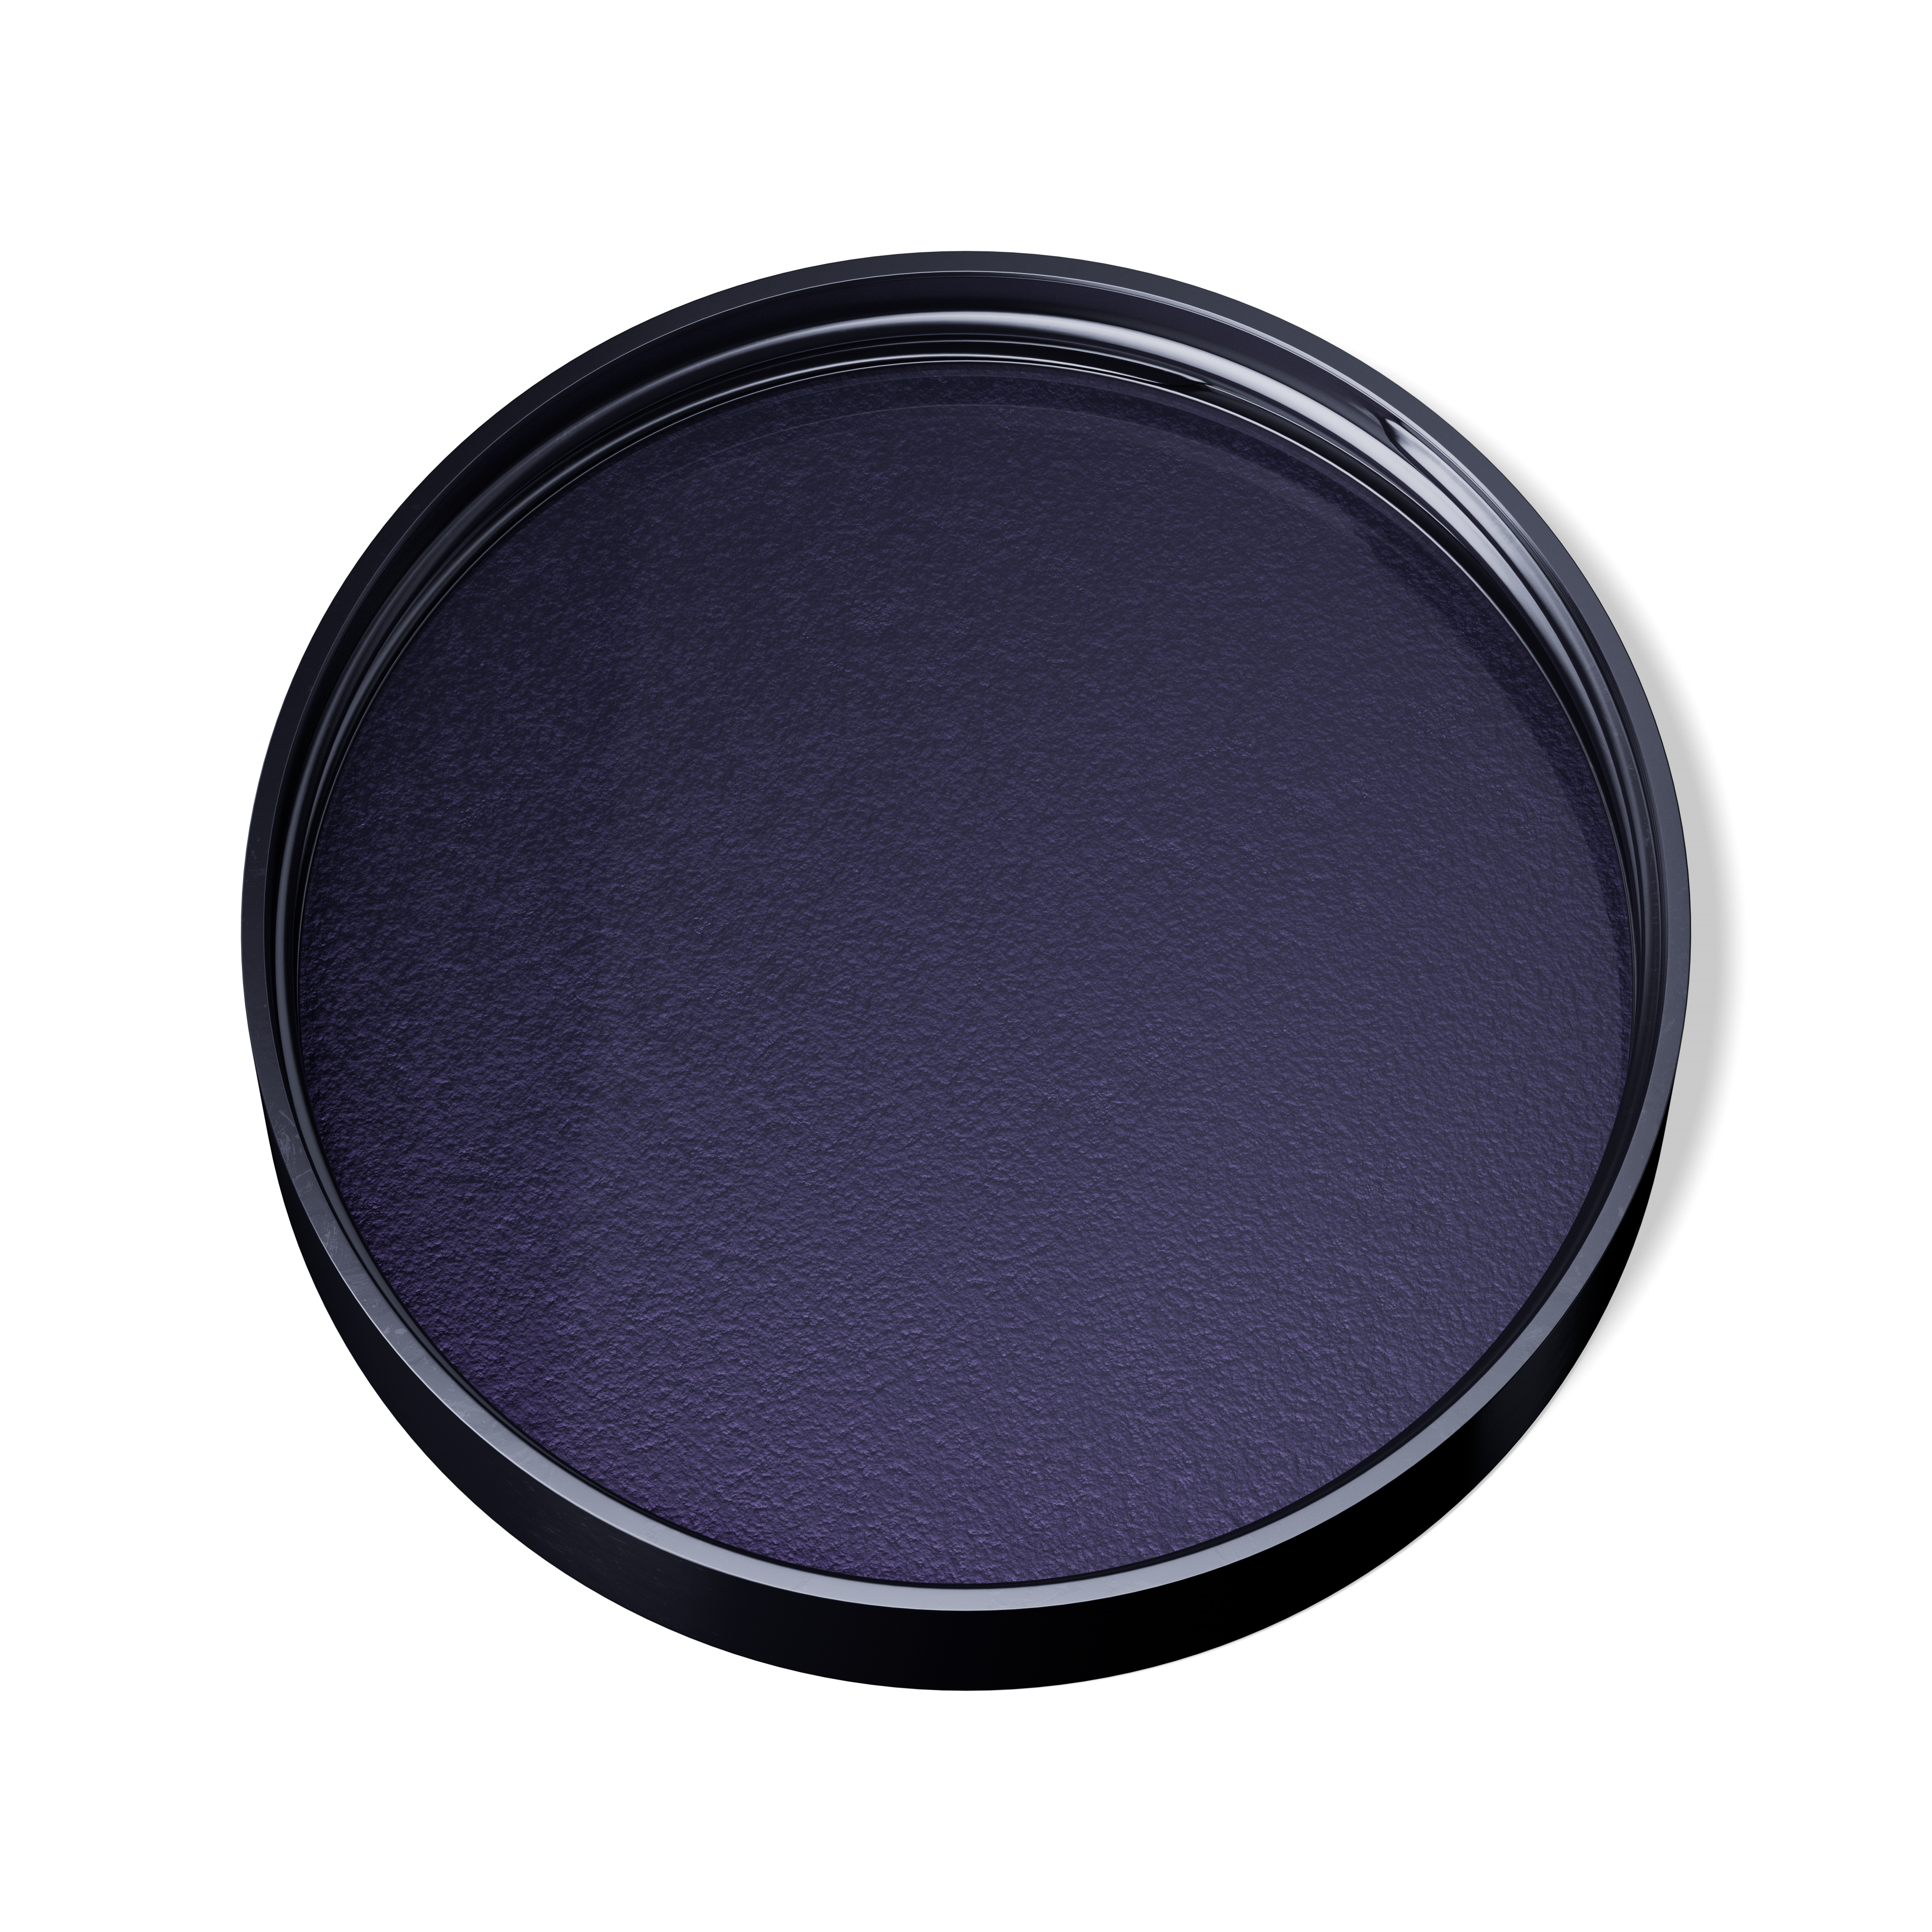 Lid Modern 87 special, PP, black, glossy finish, violet Phan inlay (Sirius 200)